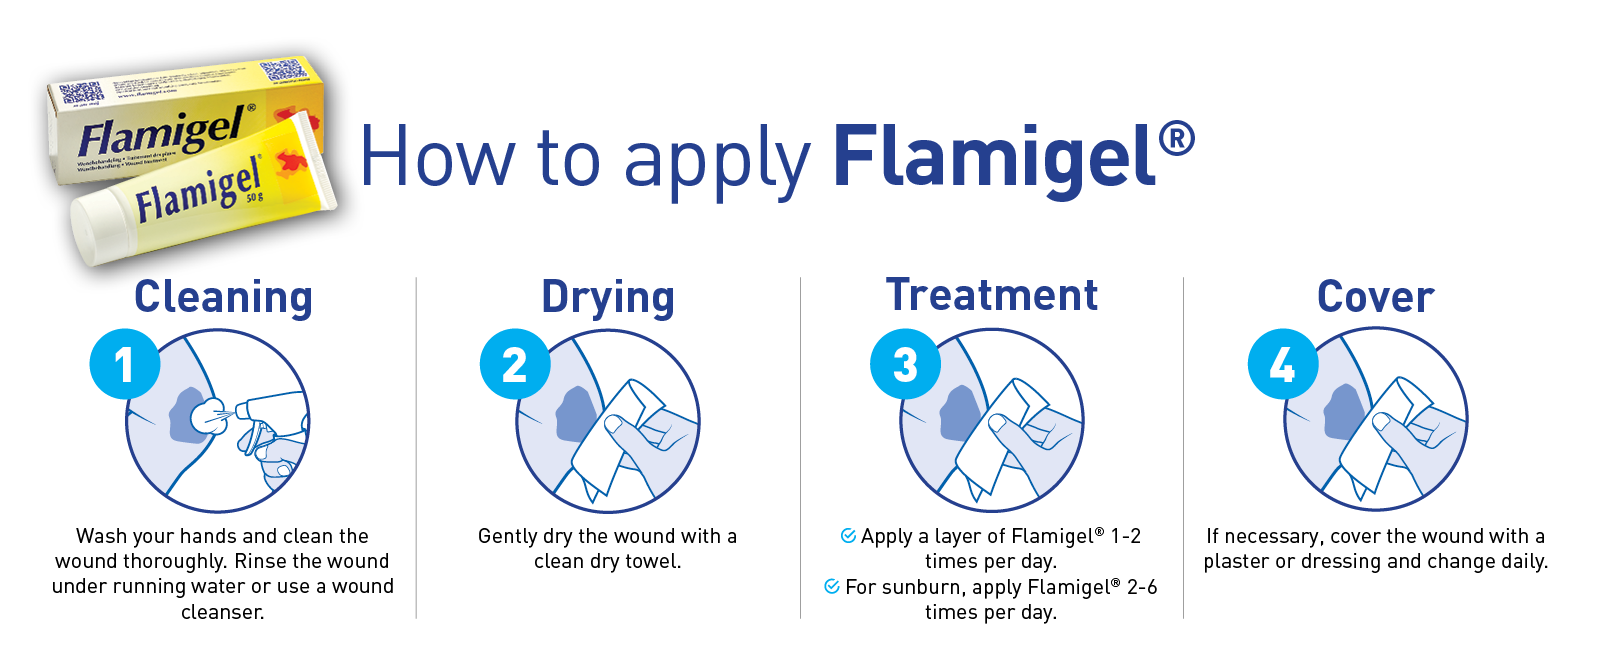 EHC Flamigel Web Page Banner 1200x500_Aug 20224.png